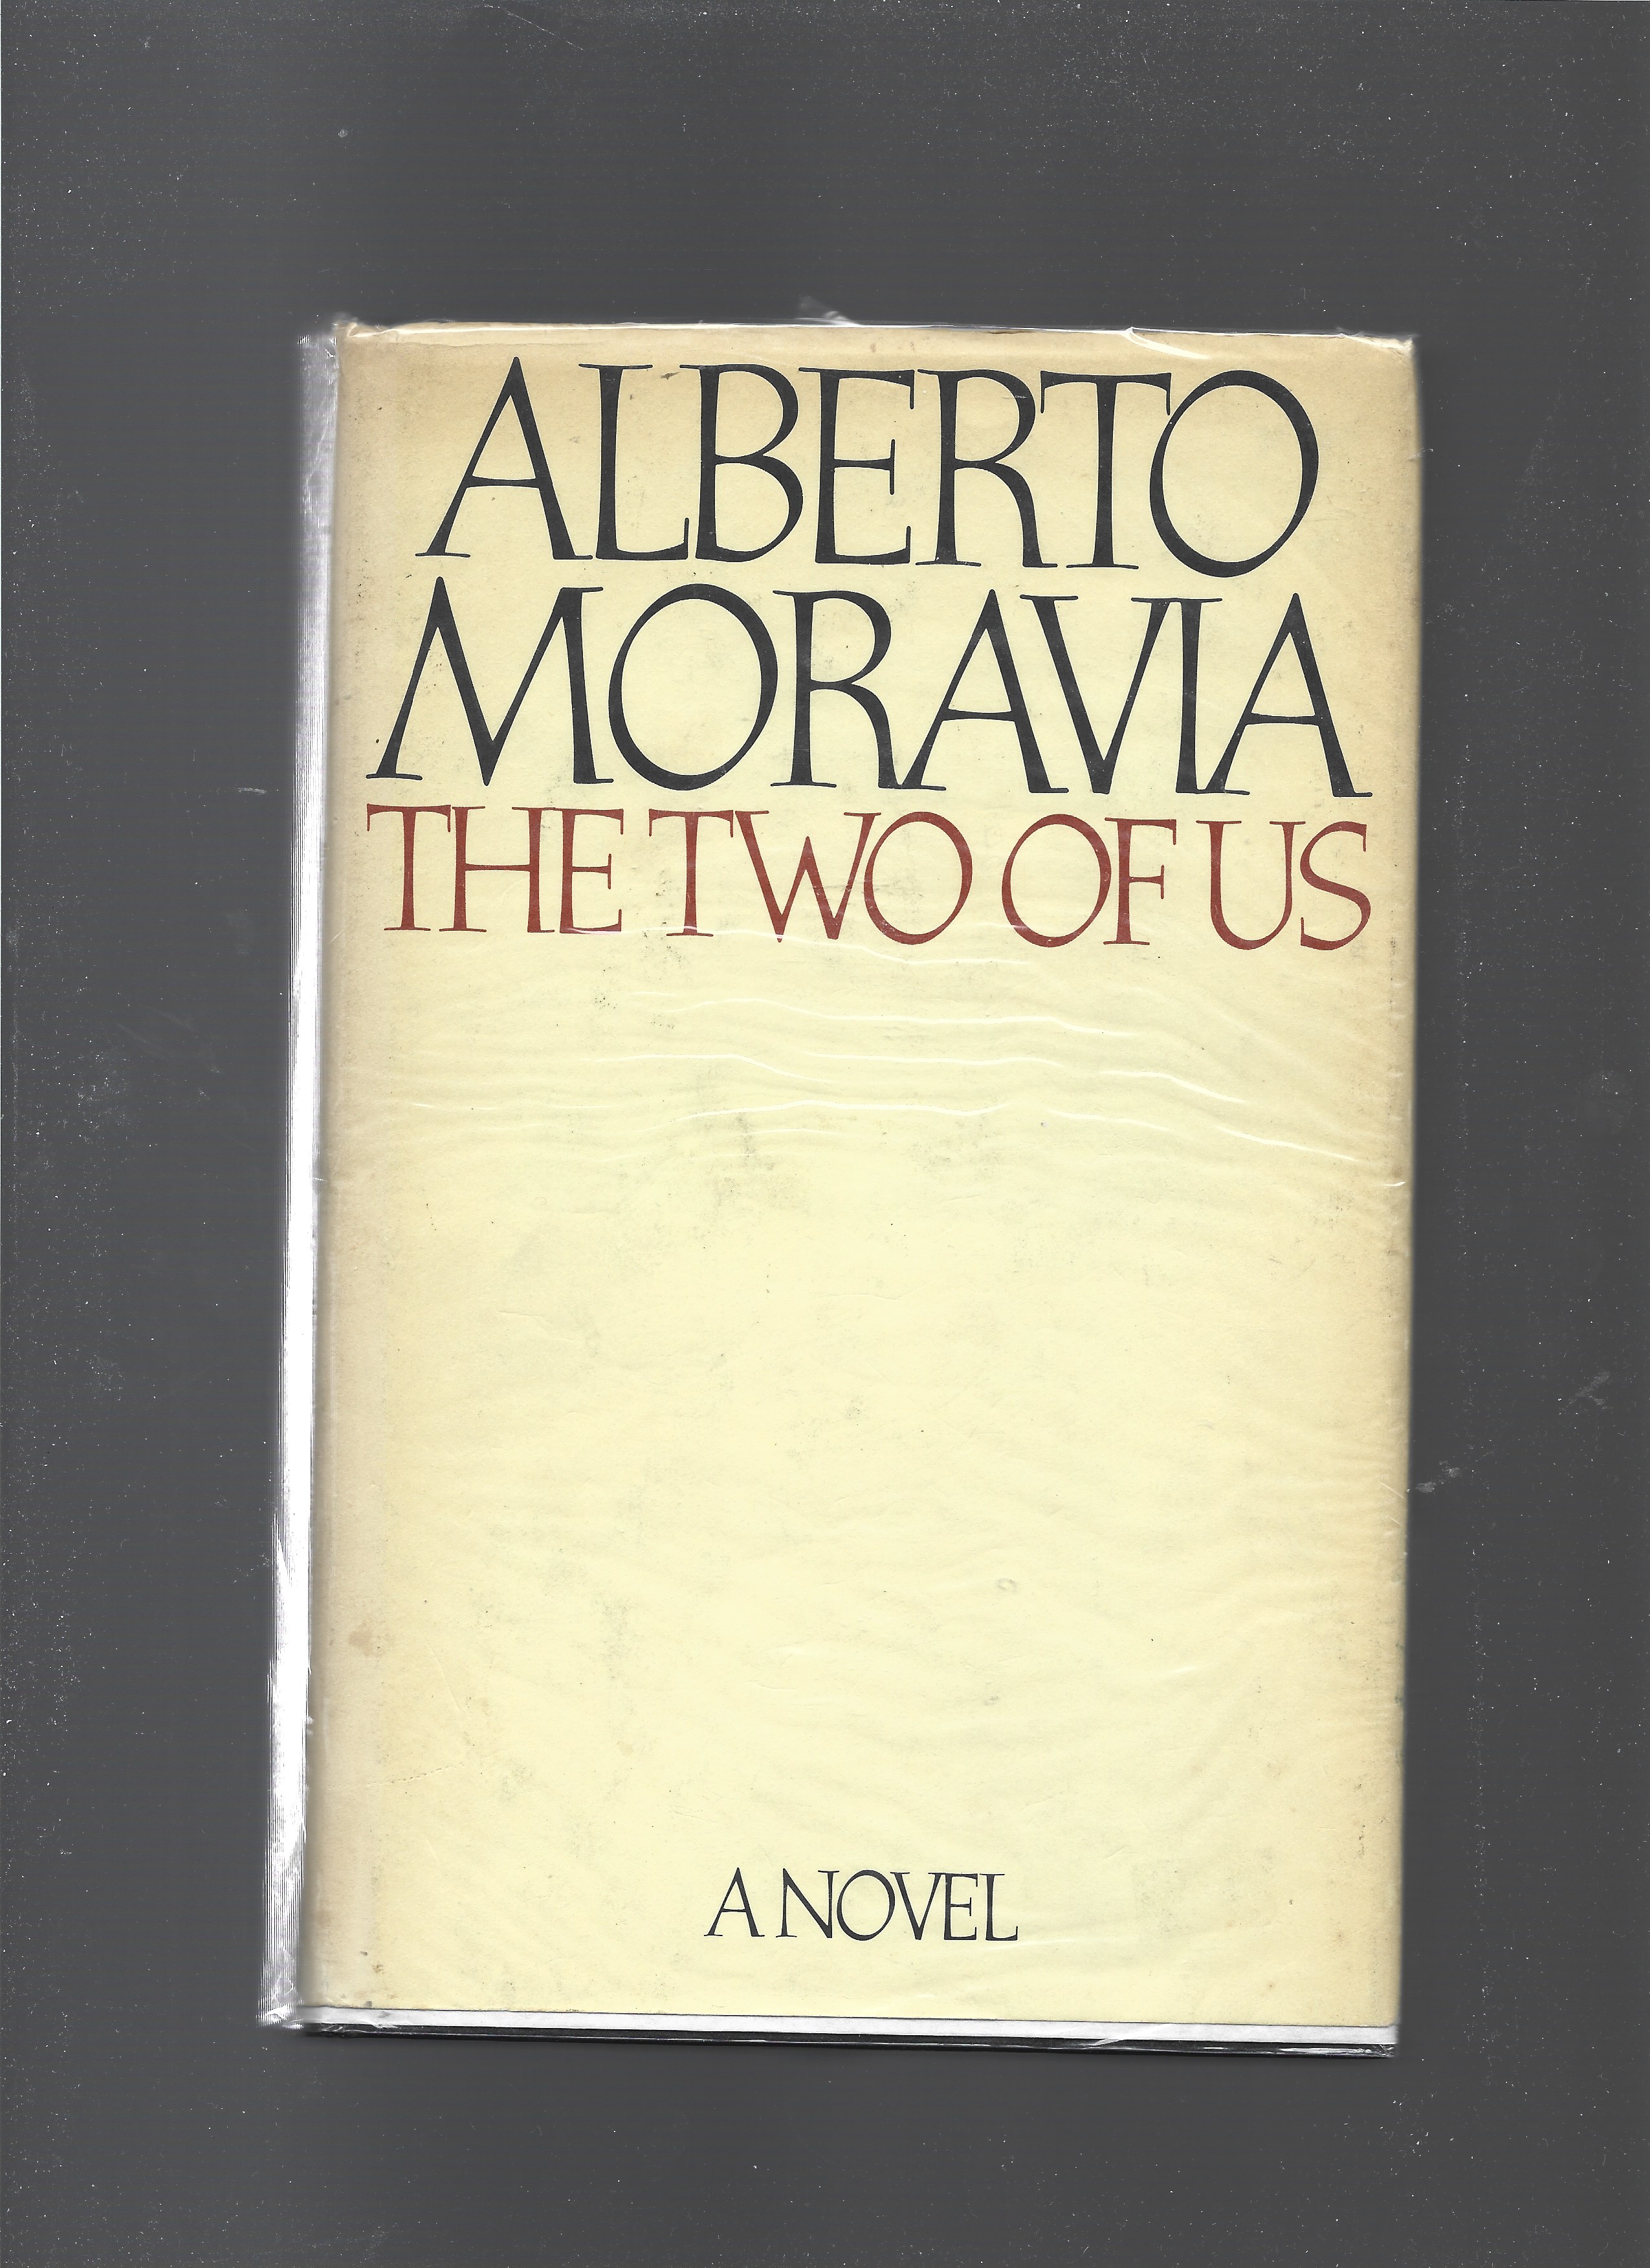 The Two of Us: A Novel